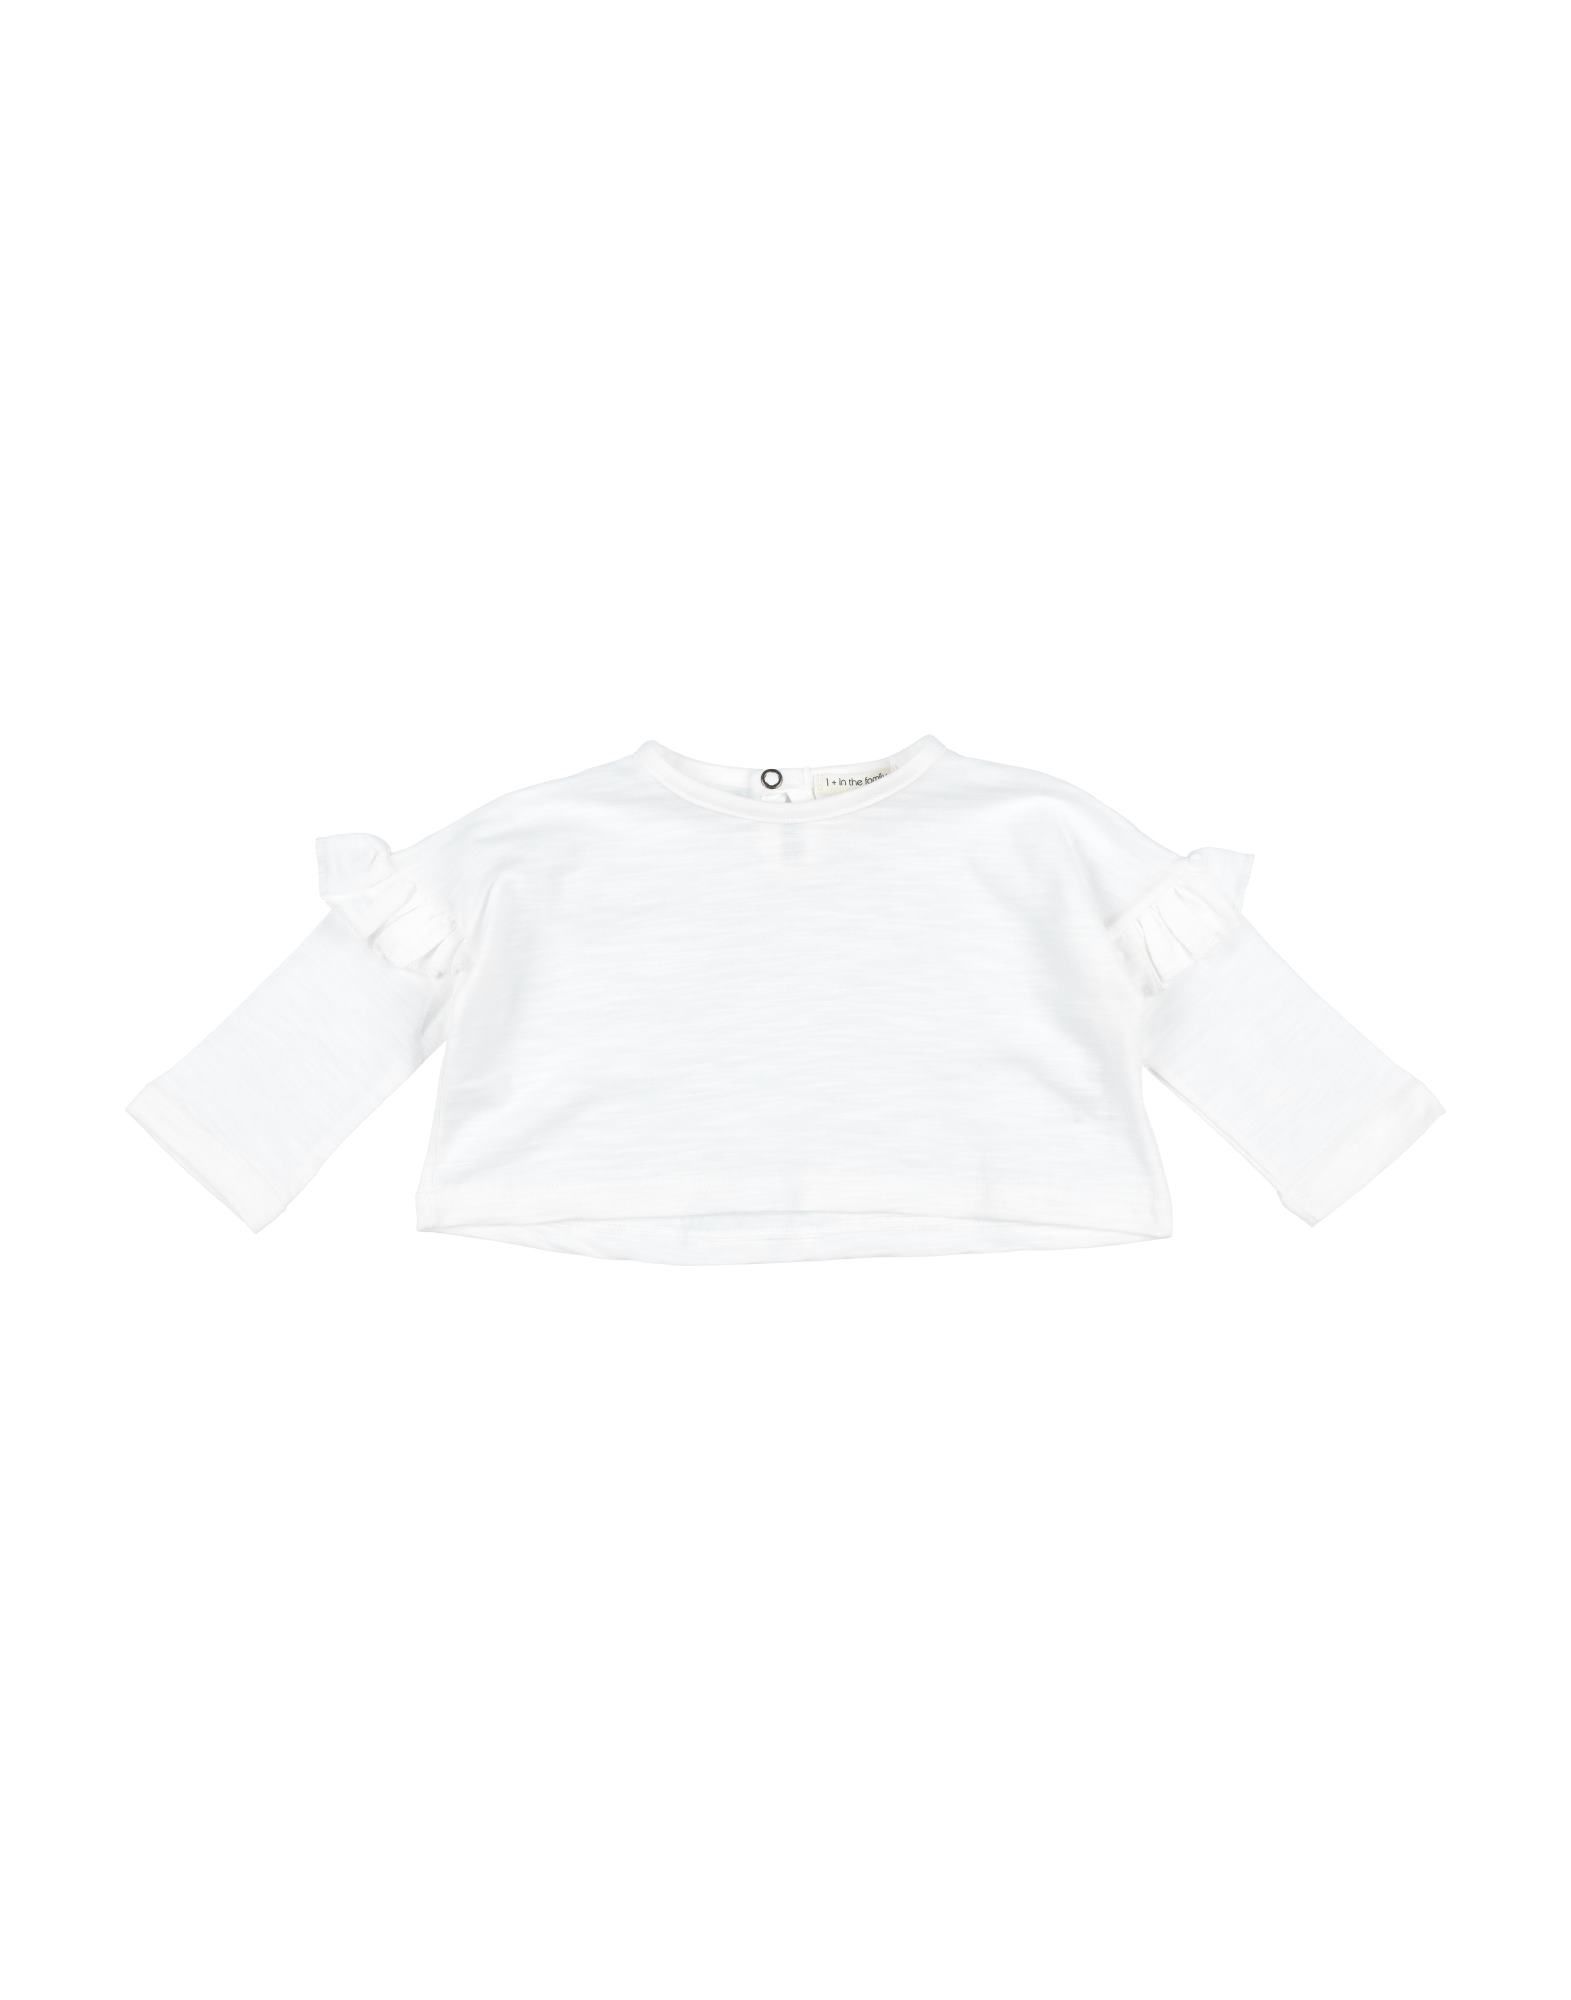 1+ In The Family Kids' T-shirts In White